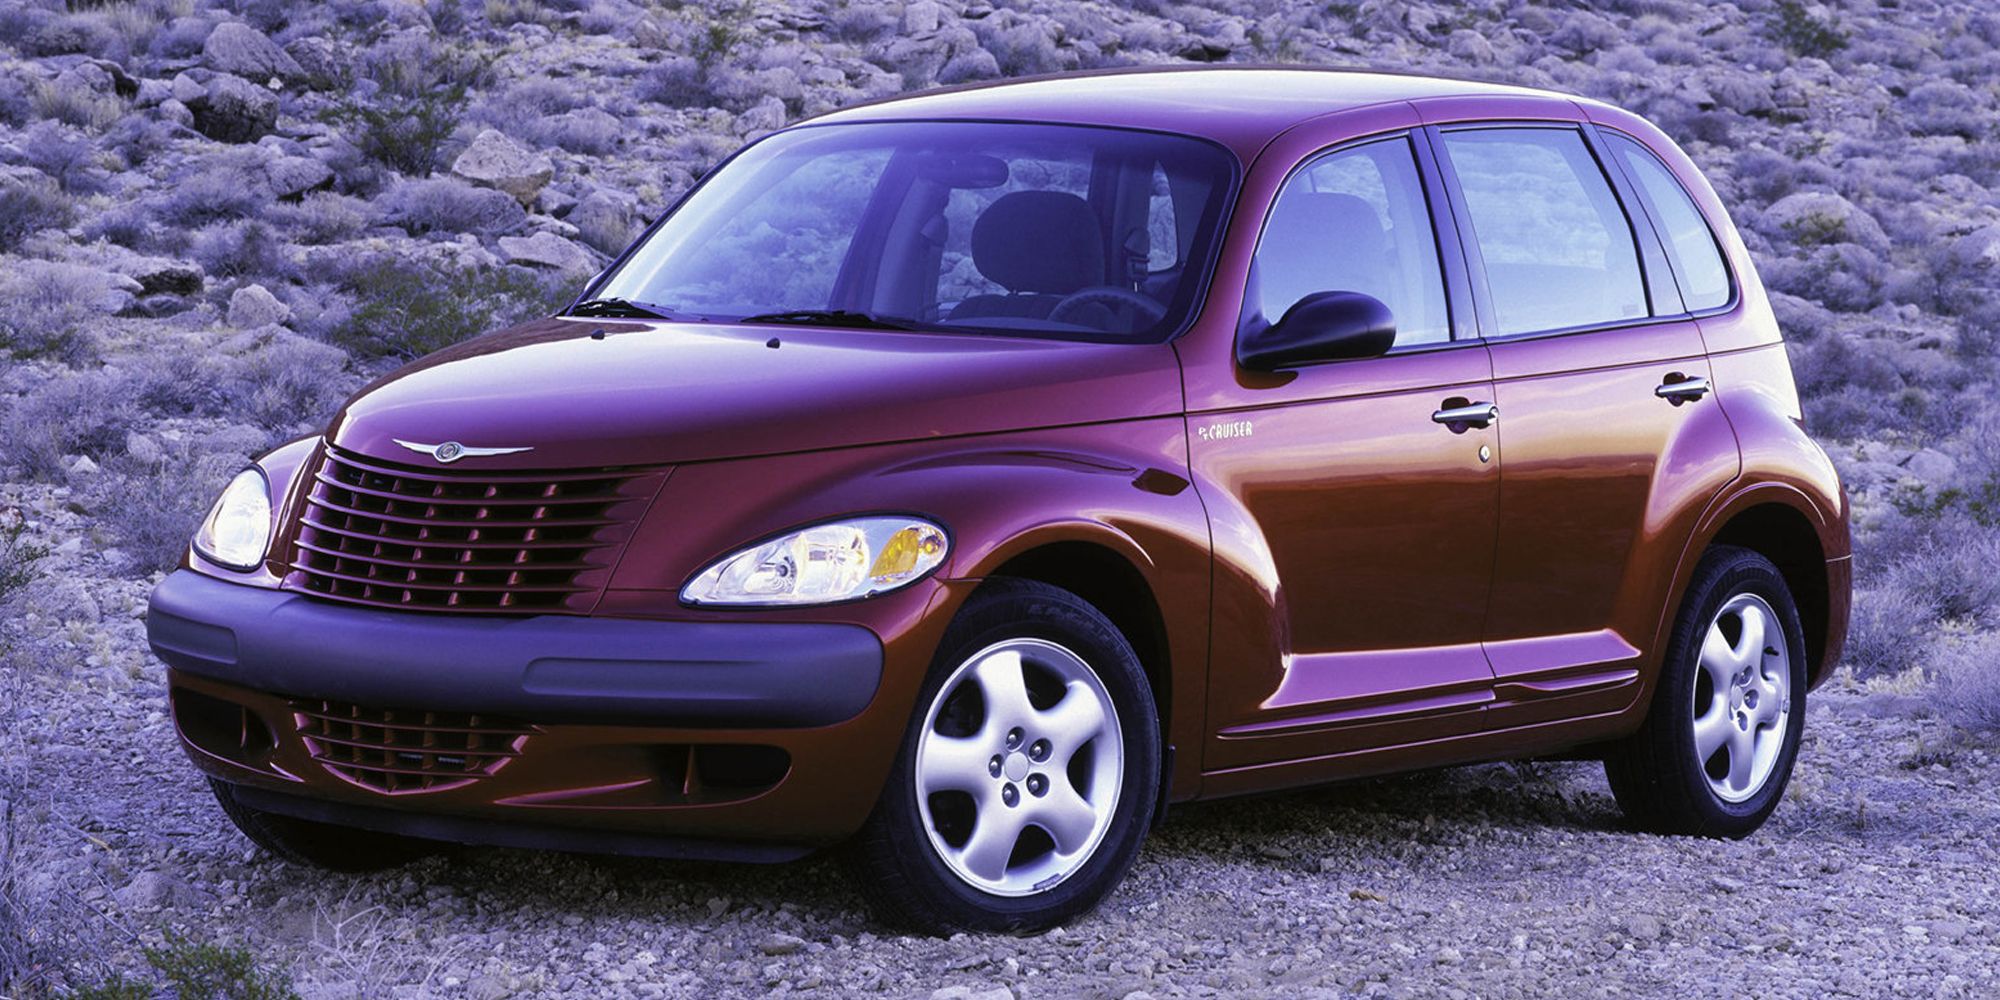 Front 3/4 view of a red PT Cruiser